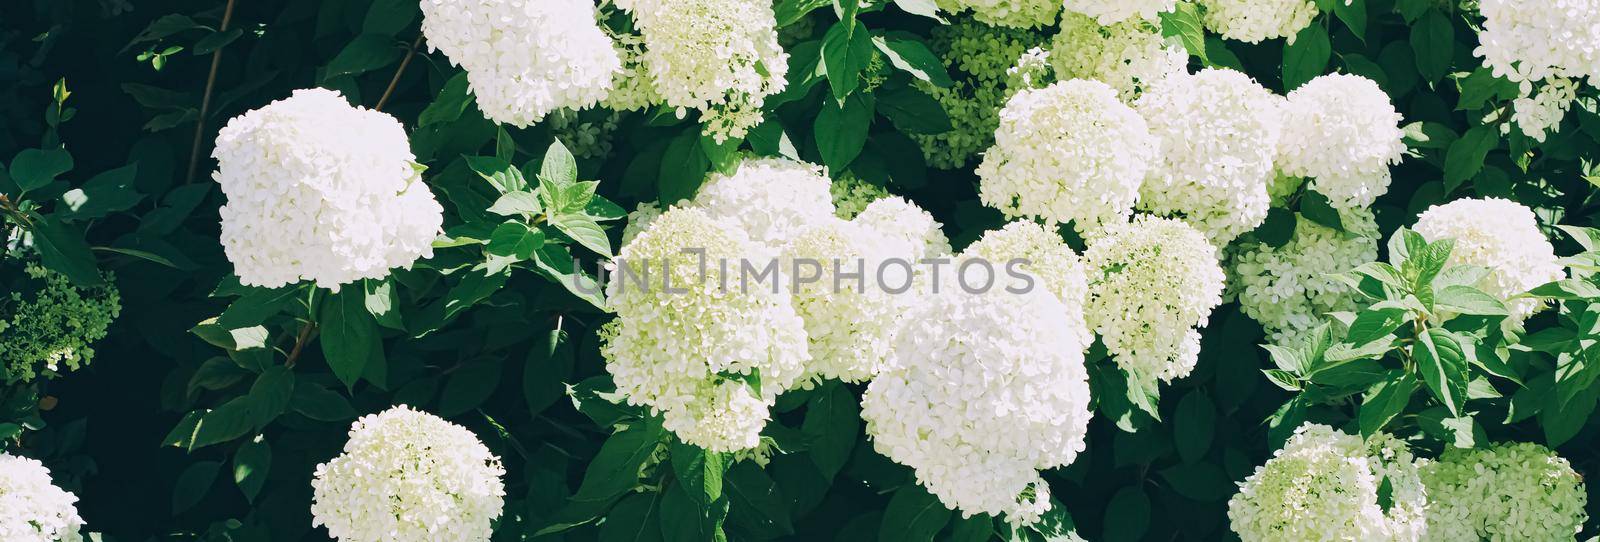 Vintage floral background, blooming hydrangea flowers in summer garden, wedding invitation design and holiday card.